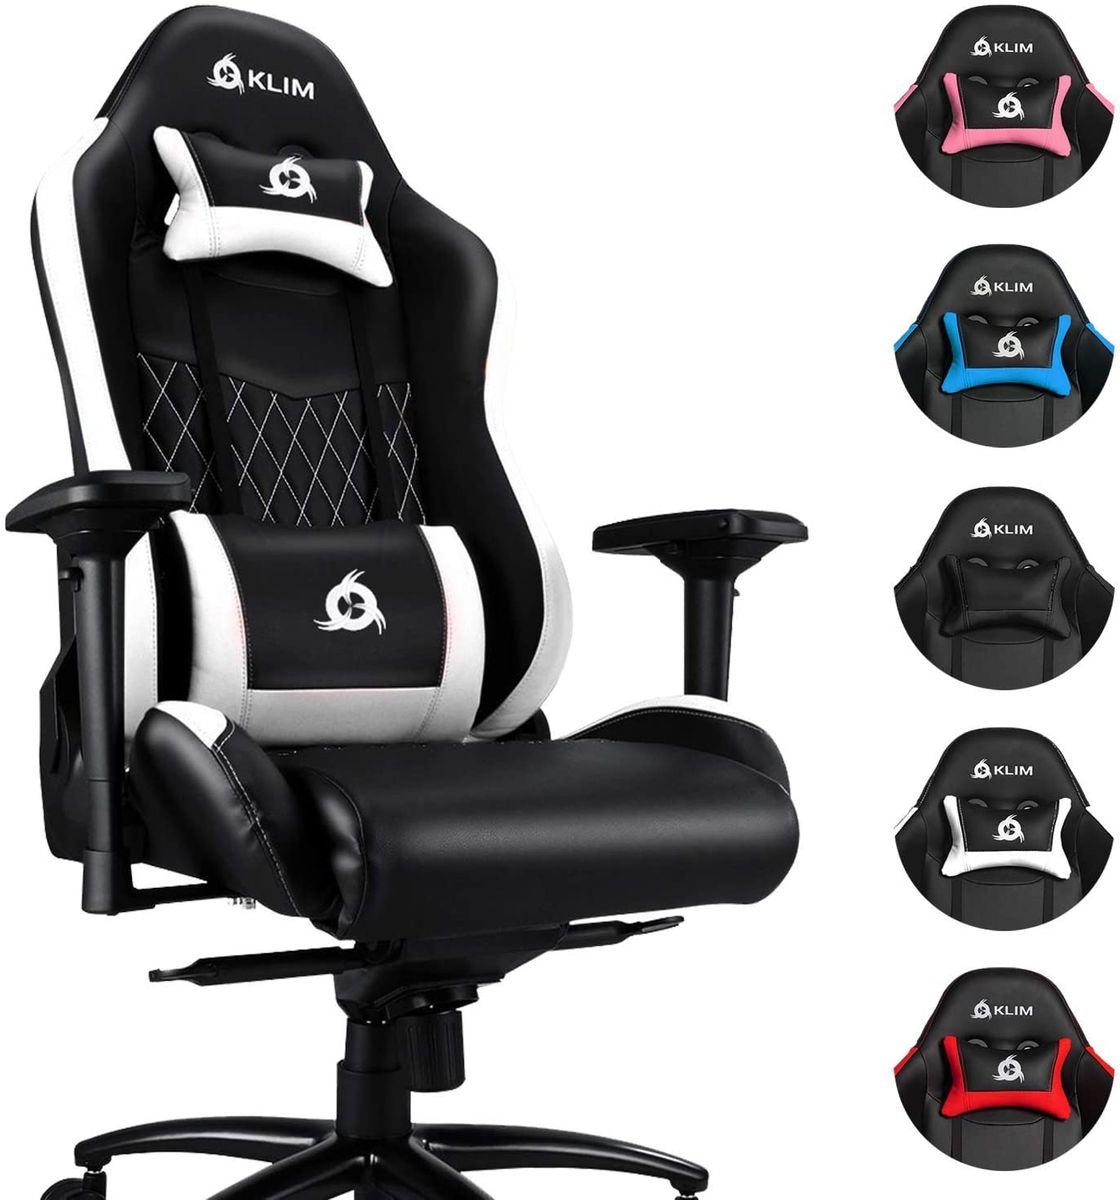 KLIM Esports Gaming Chair Executive Ergonomic Racing Computer Chair - Back & Head Support - New - Adjustable Armrest - Desk & Office Recliner - Silla Gamer - Black & White Cushion